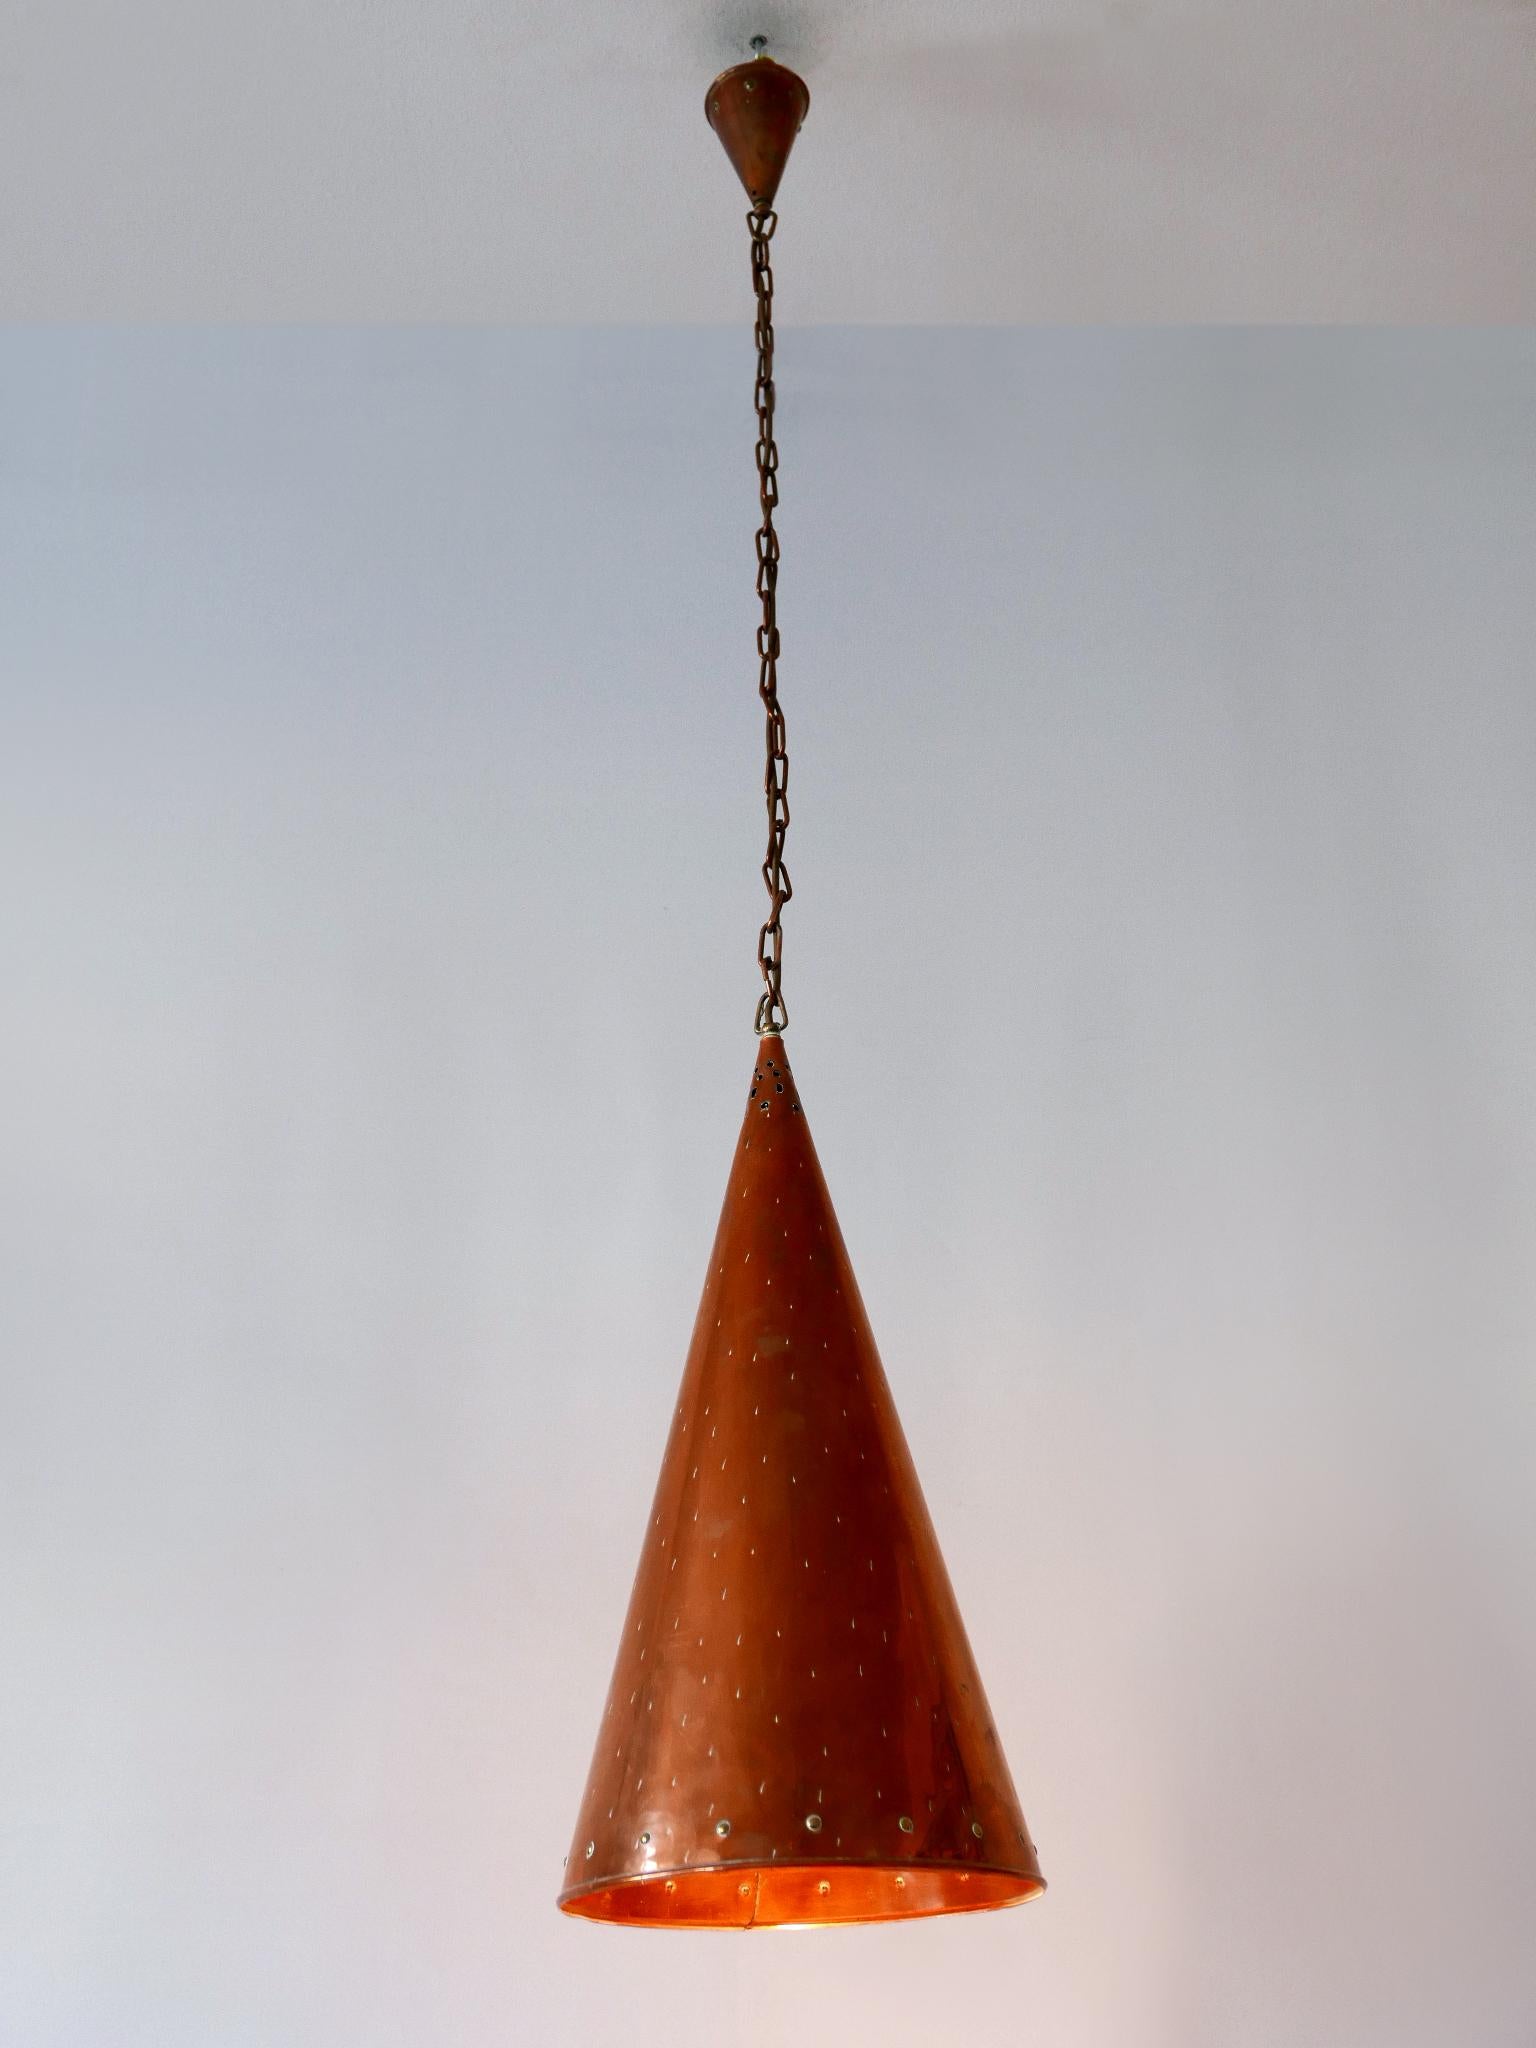 Hammered XL Mid Century Modern Copper Pendant Lamp by E.S. Horn Aalestrup Denmark 1950s For Sale